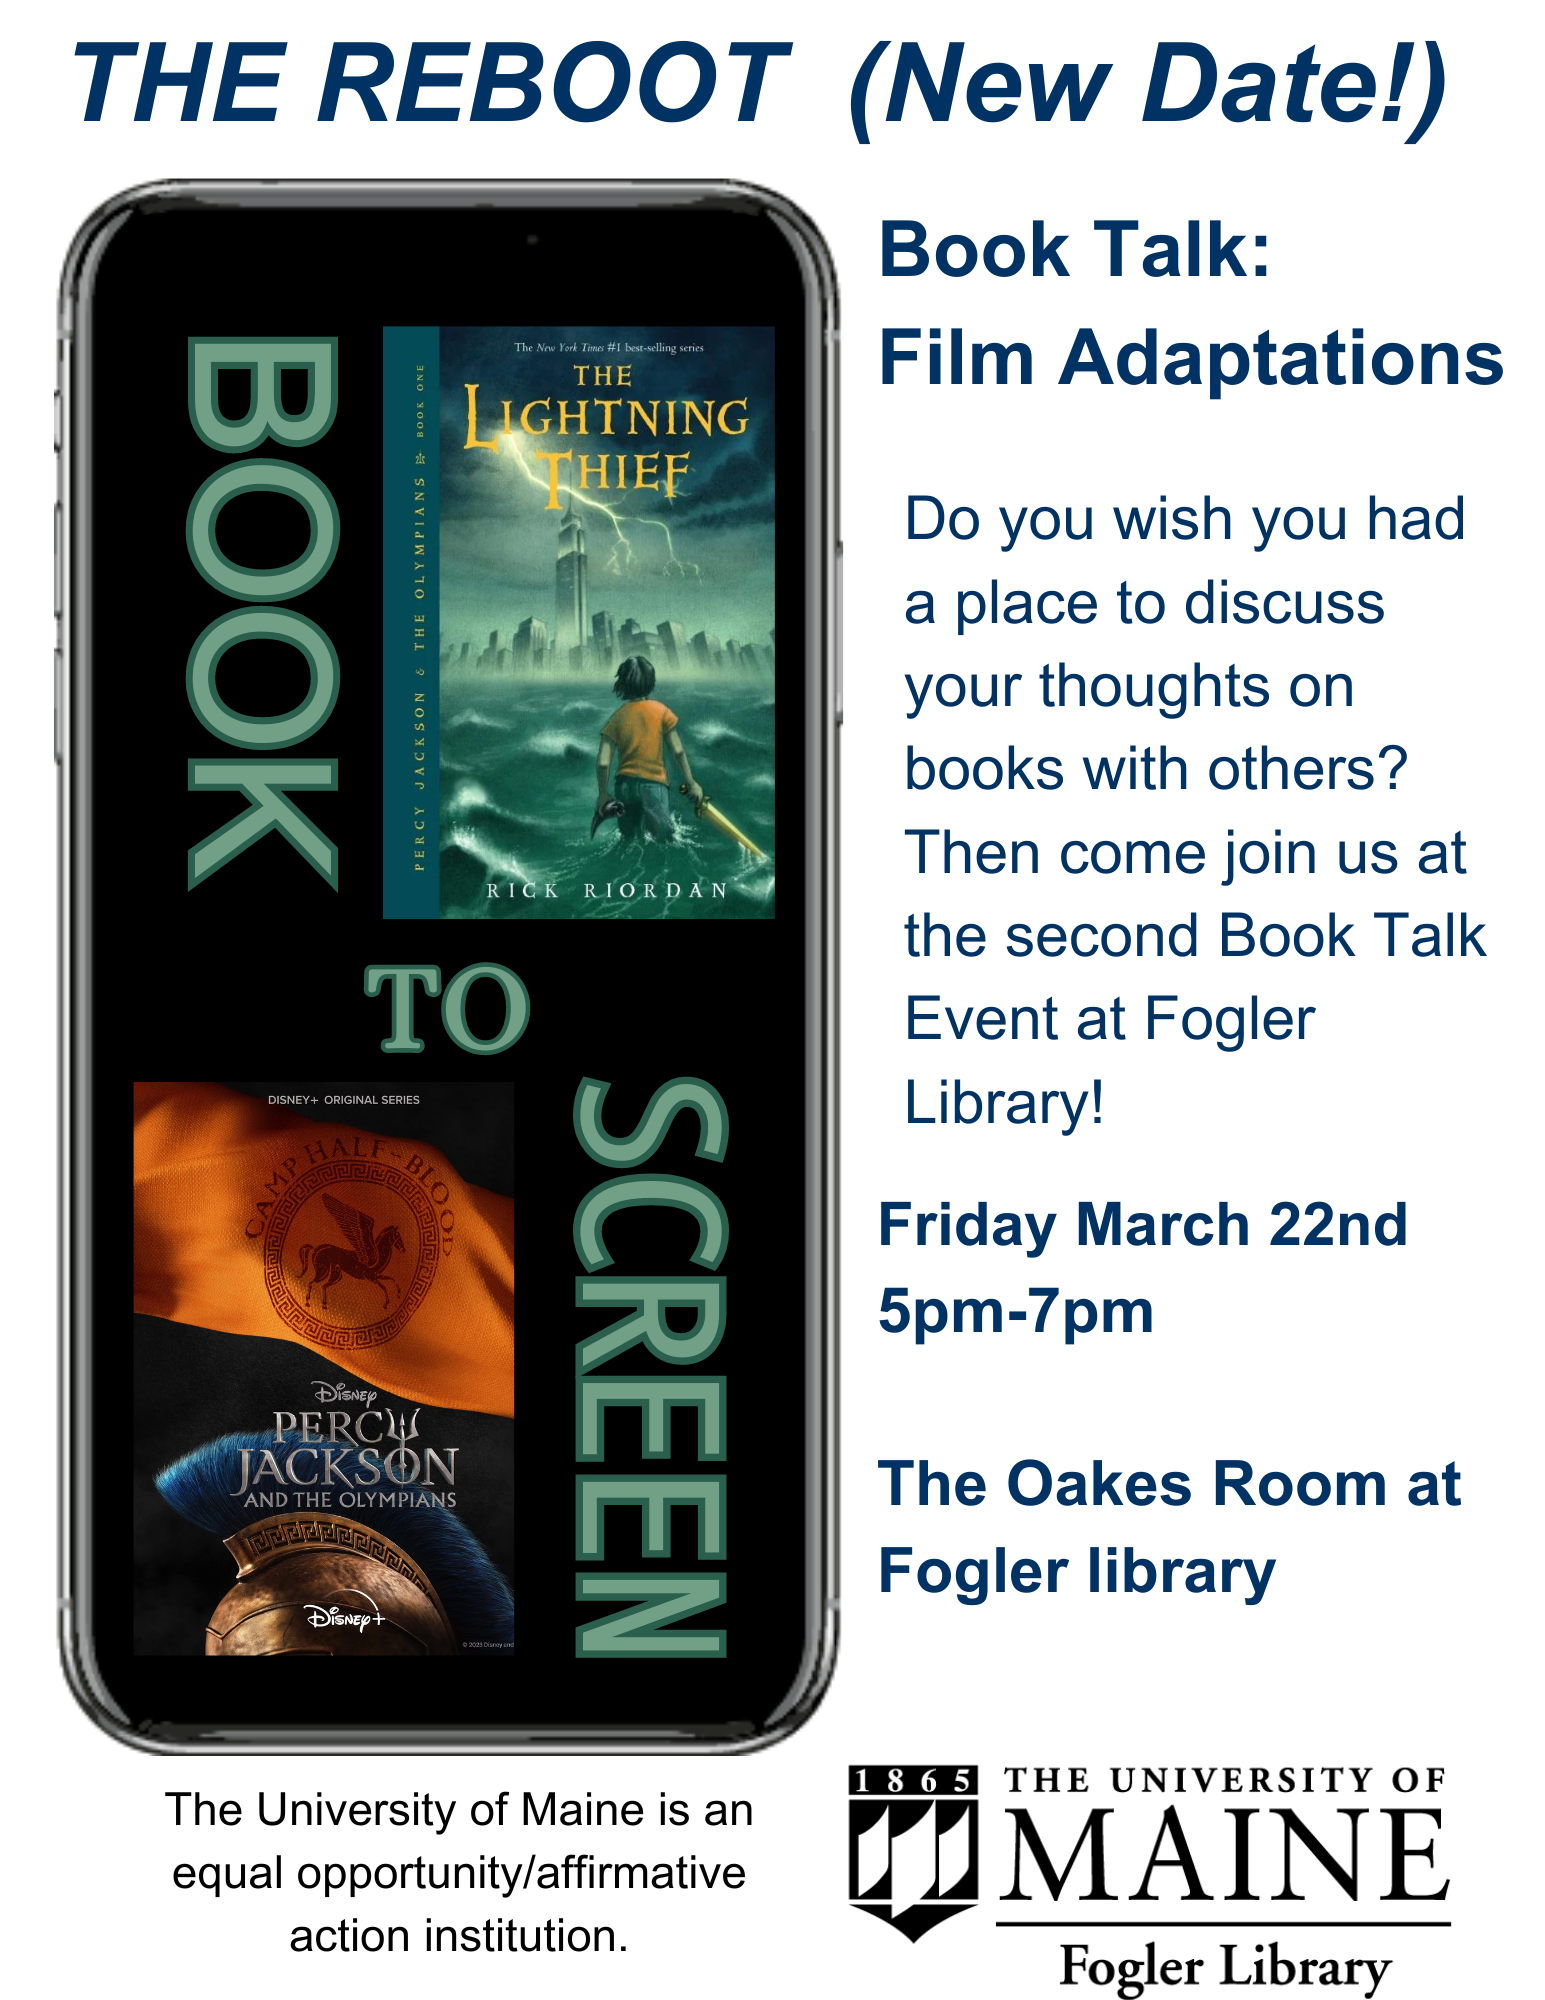 Image of a phone screen featuring the book cover for The Lightning Thief by Rick Riordan next to the series poster for Percy Jackson and the Olympians, based upon the book series.